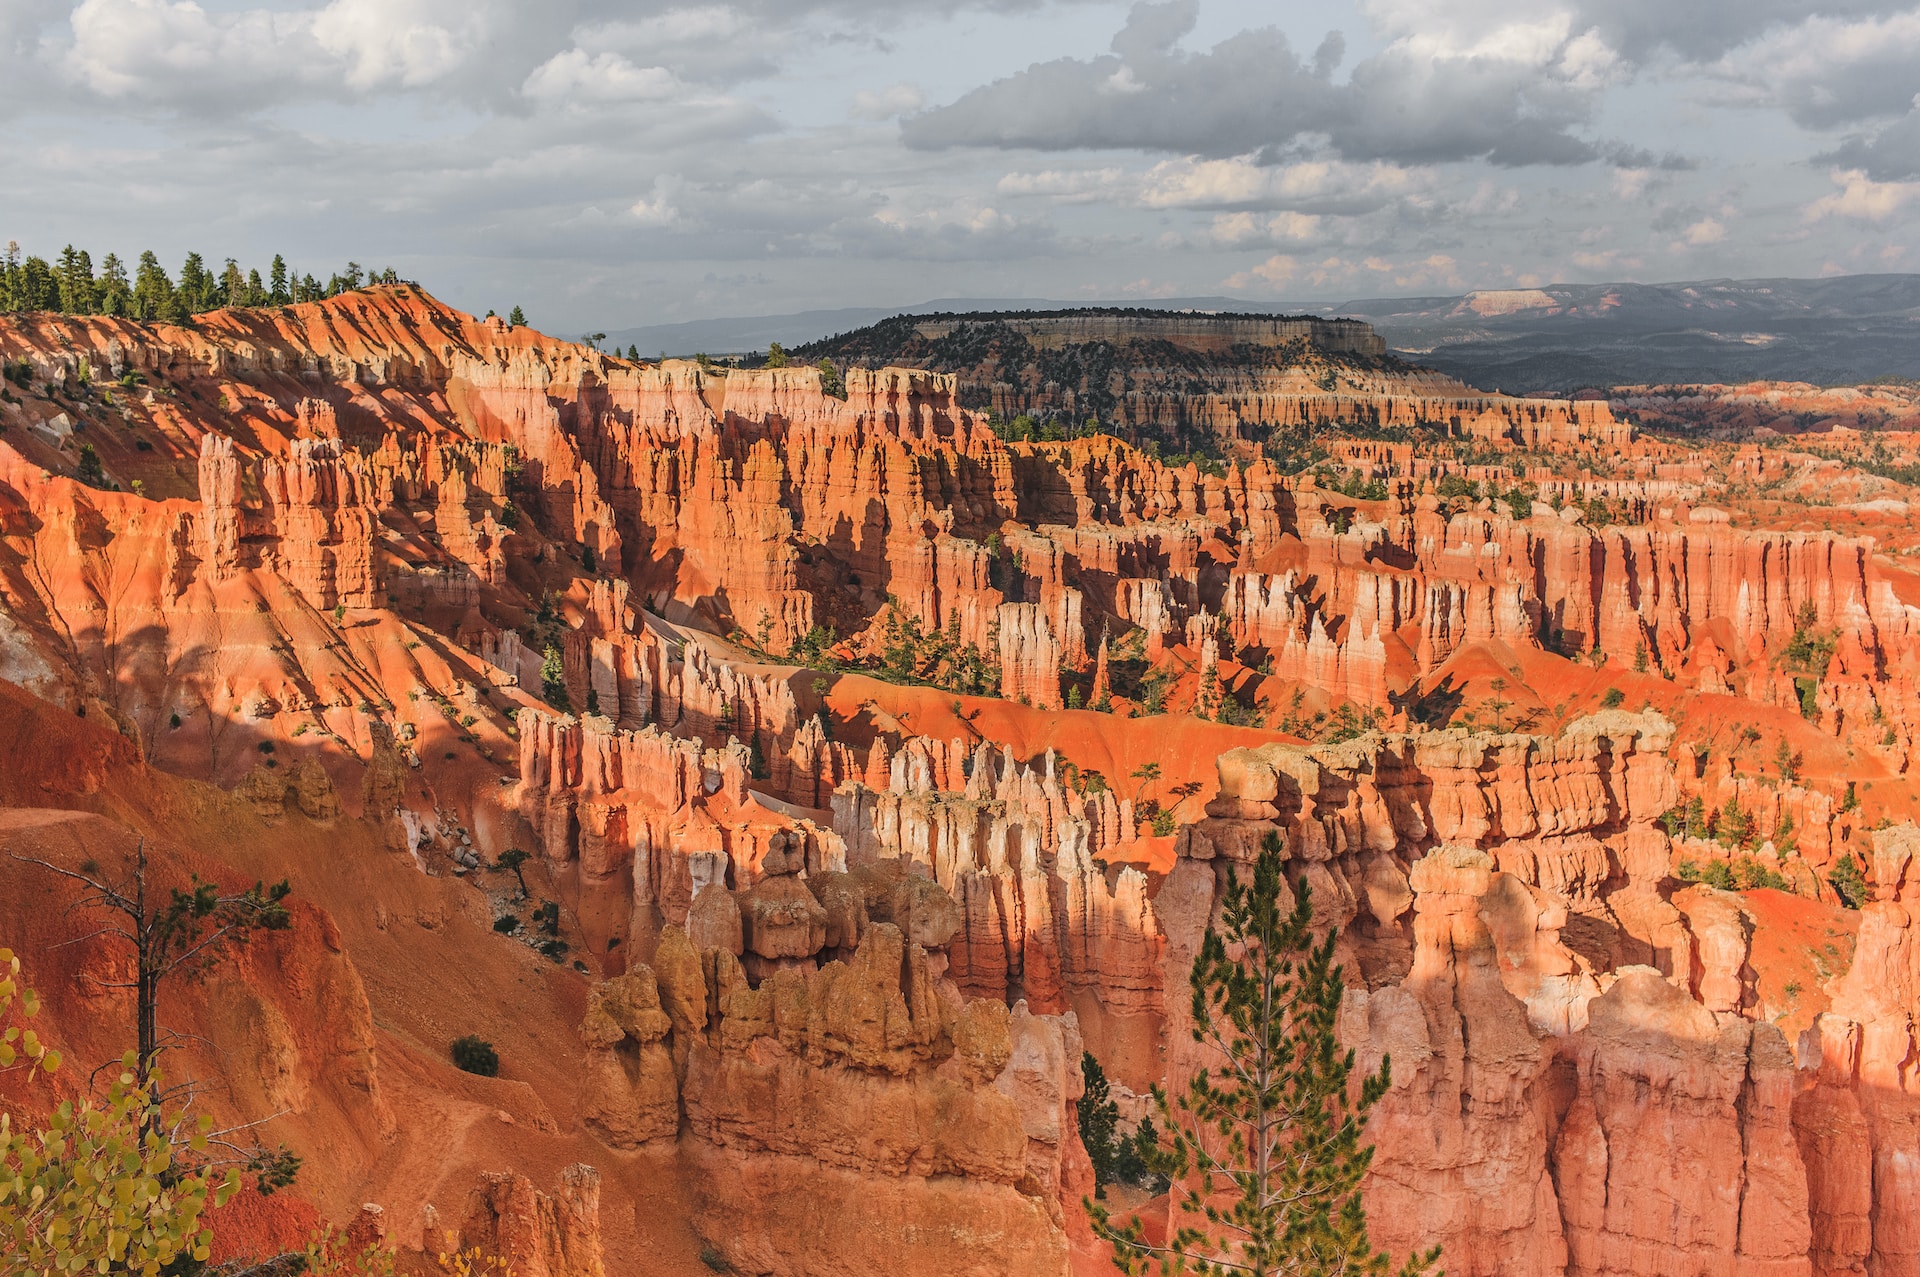 The hoodoos of the Bryce Canyon.